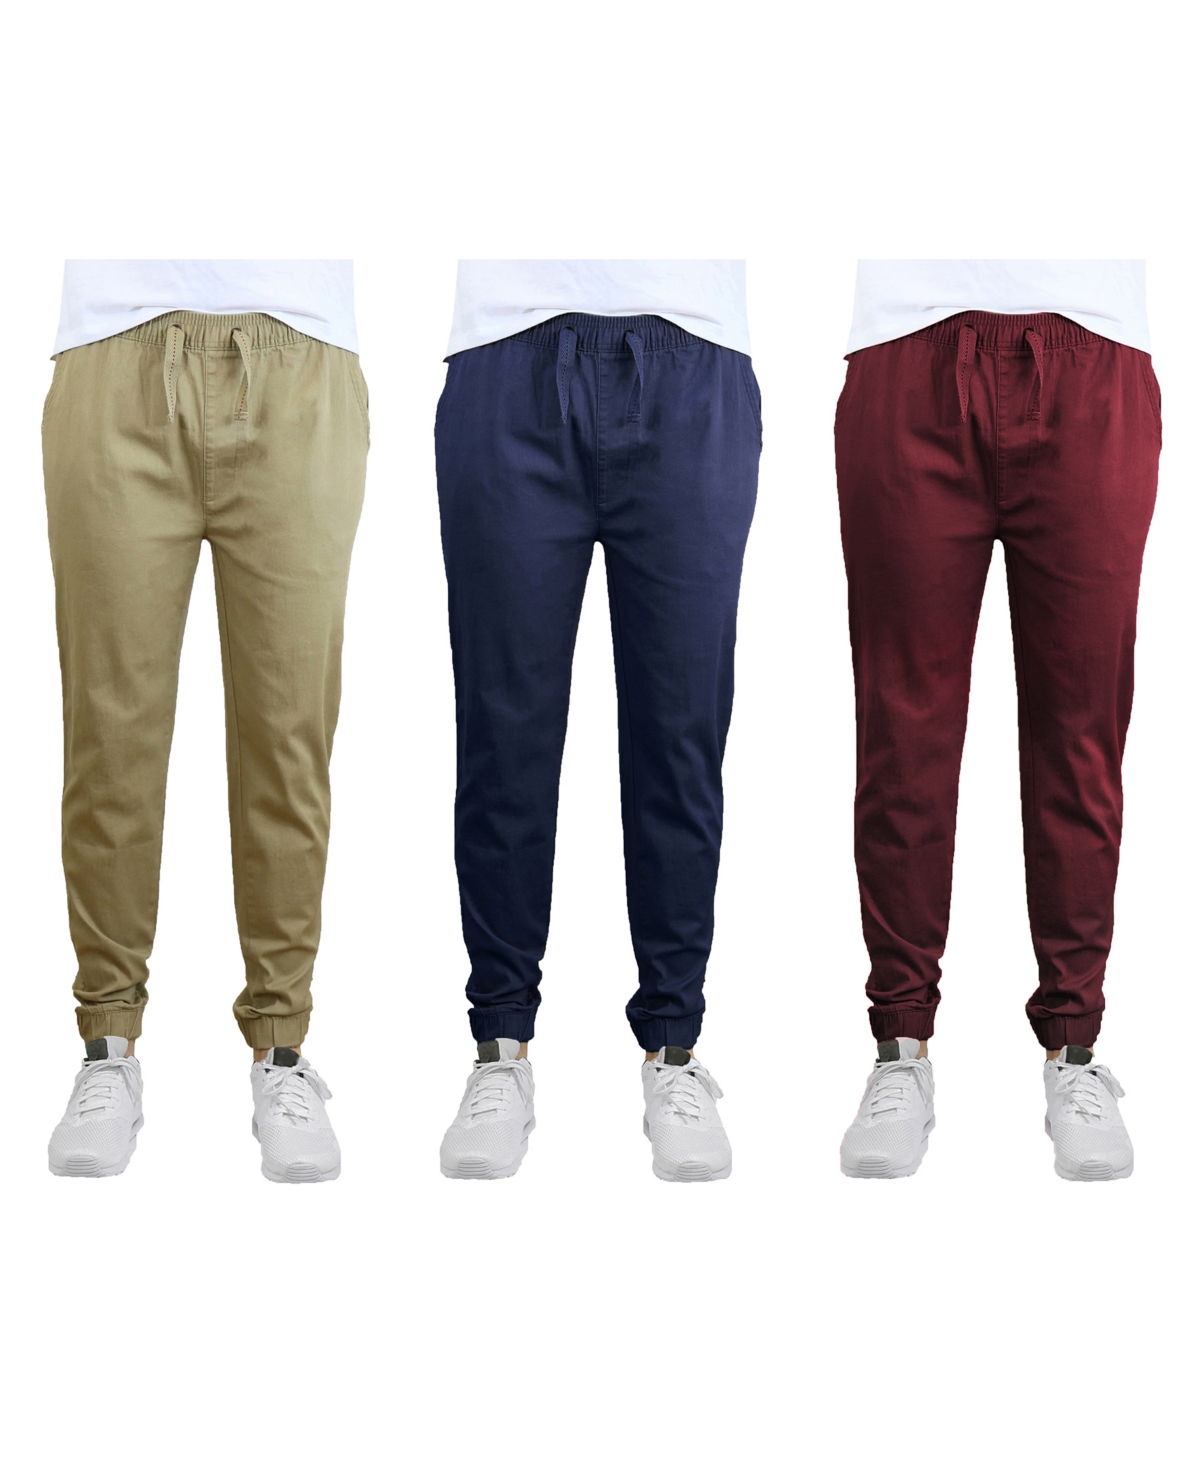 Galaxy By Harvic Men's Slim Fit Basic Stretch Twill Joggers, Pack Of 3 In Khaki,navy And Burgundy